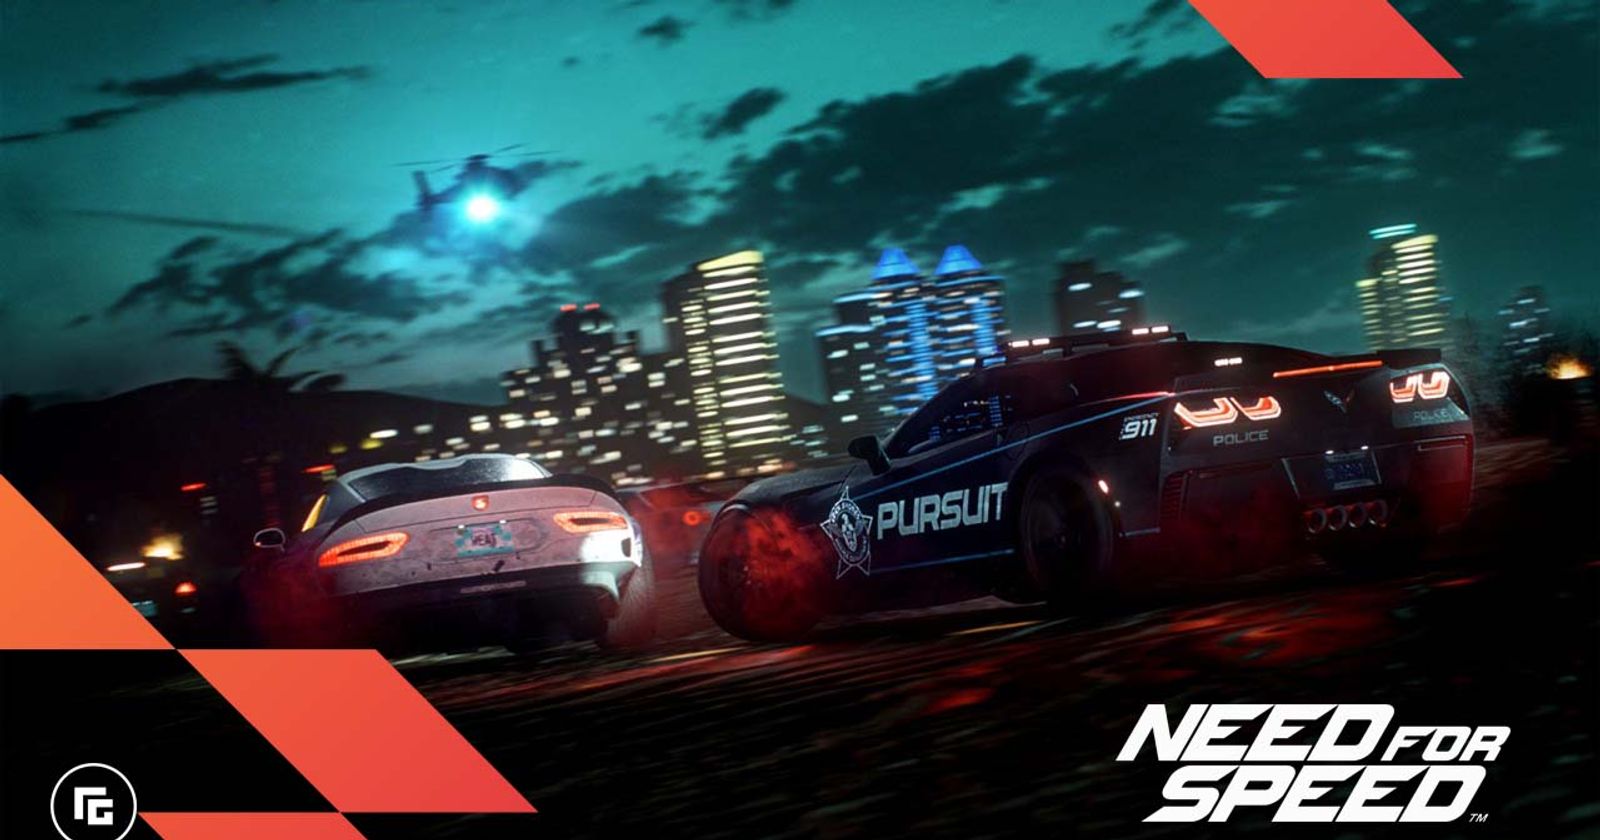 EA Sports Need for Speed Games